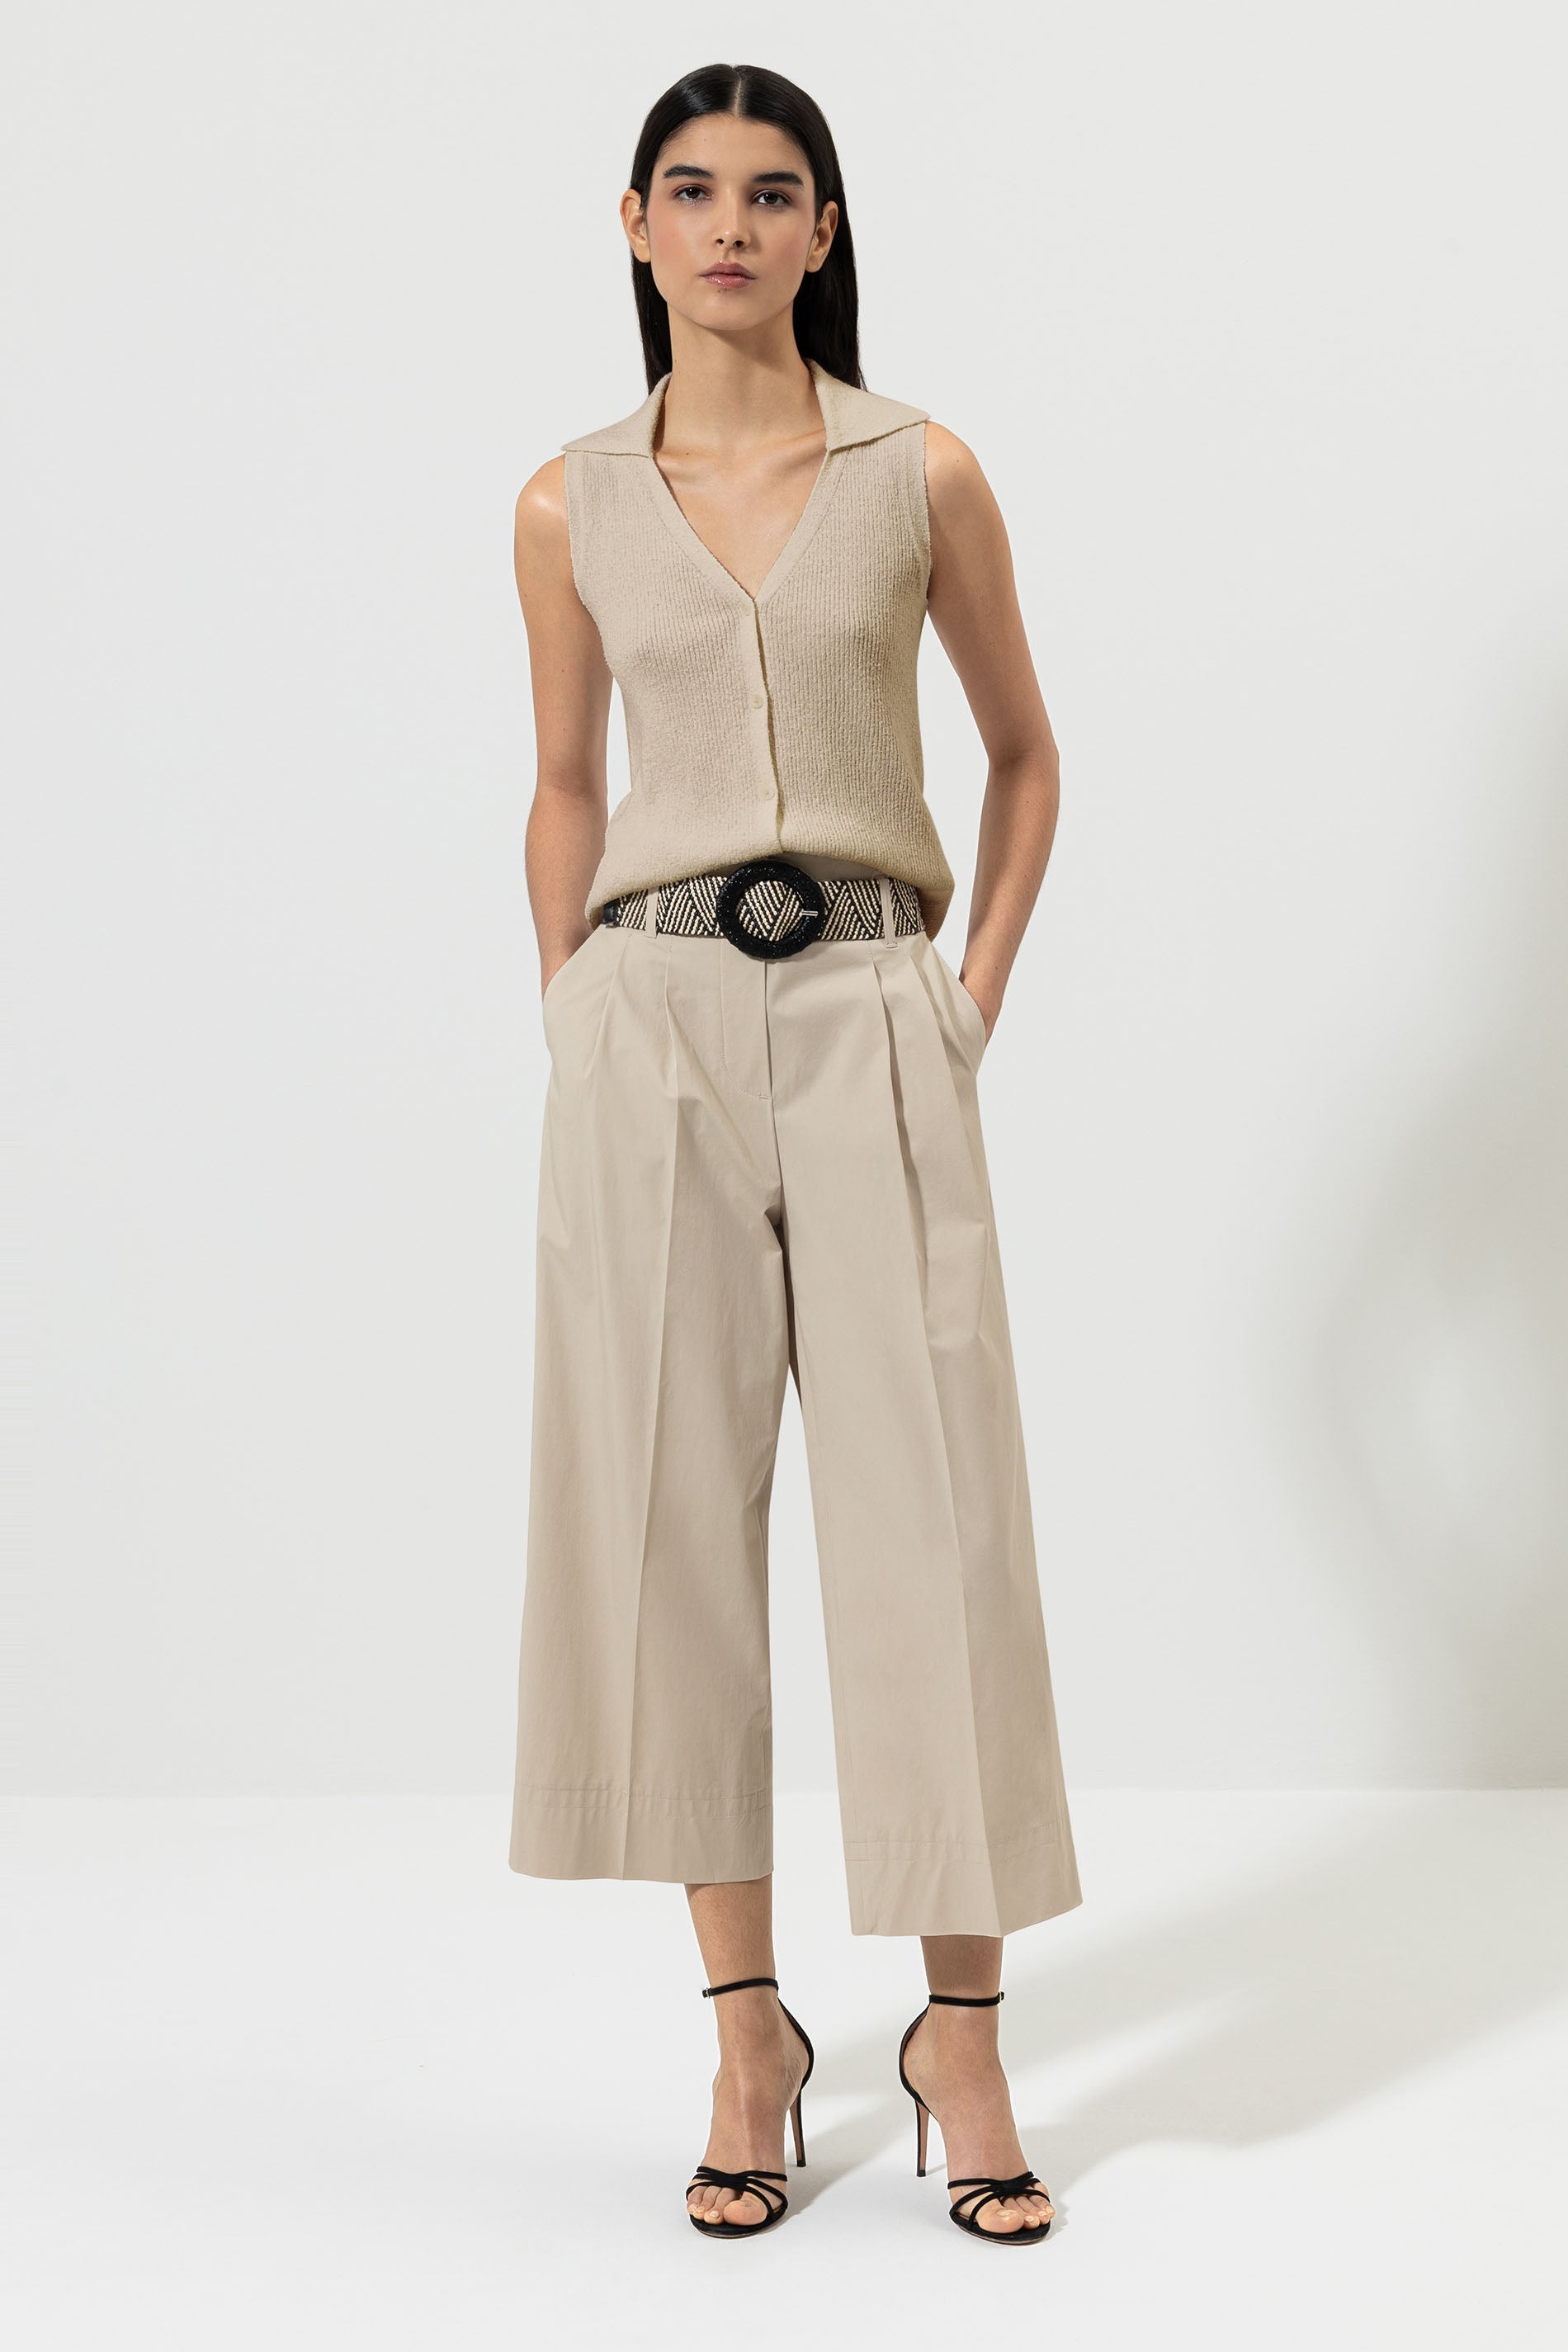 LUISA-CERANO-OUTLET-SALE-Gabardine-Paperbag-Pants-Hosen-ARCHIVE-COLLECTION_c0bf5004-1b0f-4715-b720-2d651ae9fd7a.jpg